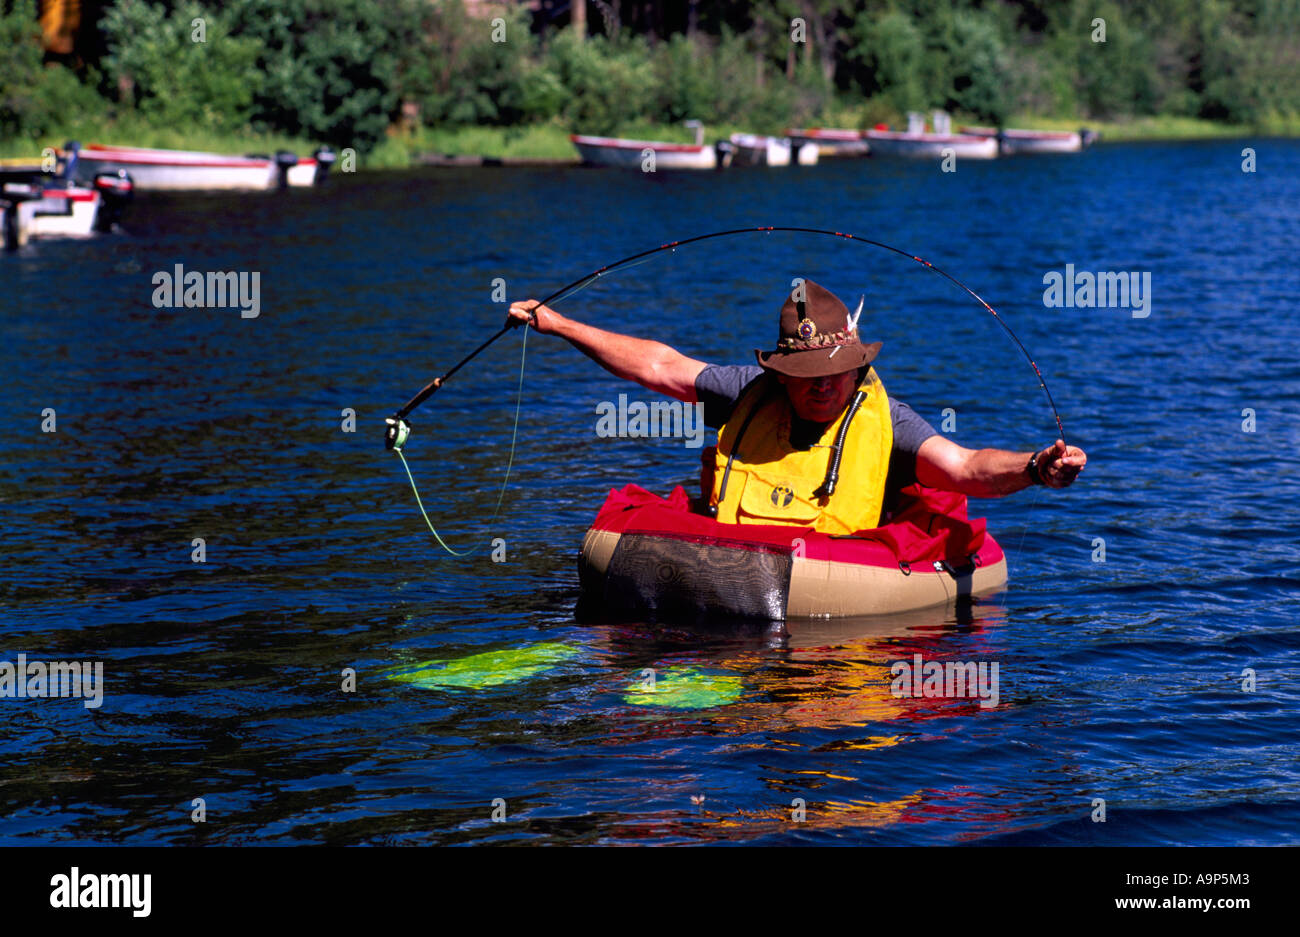 https://c8.alamy.com/comp/A9P5M3/fly-fisherman-in-a-belly-boat-fishing-for-trout-in-hi-hium-lake-in-A9P5M3.jpg